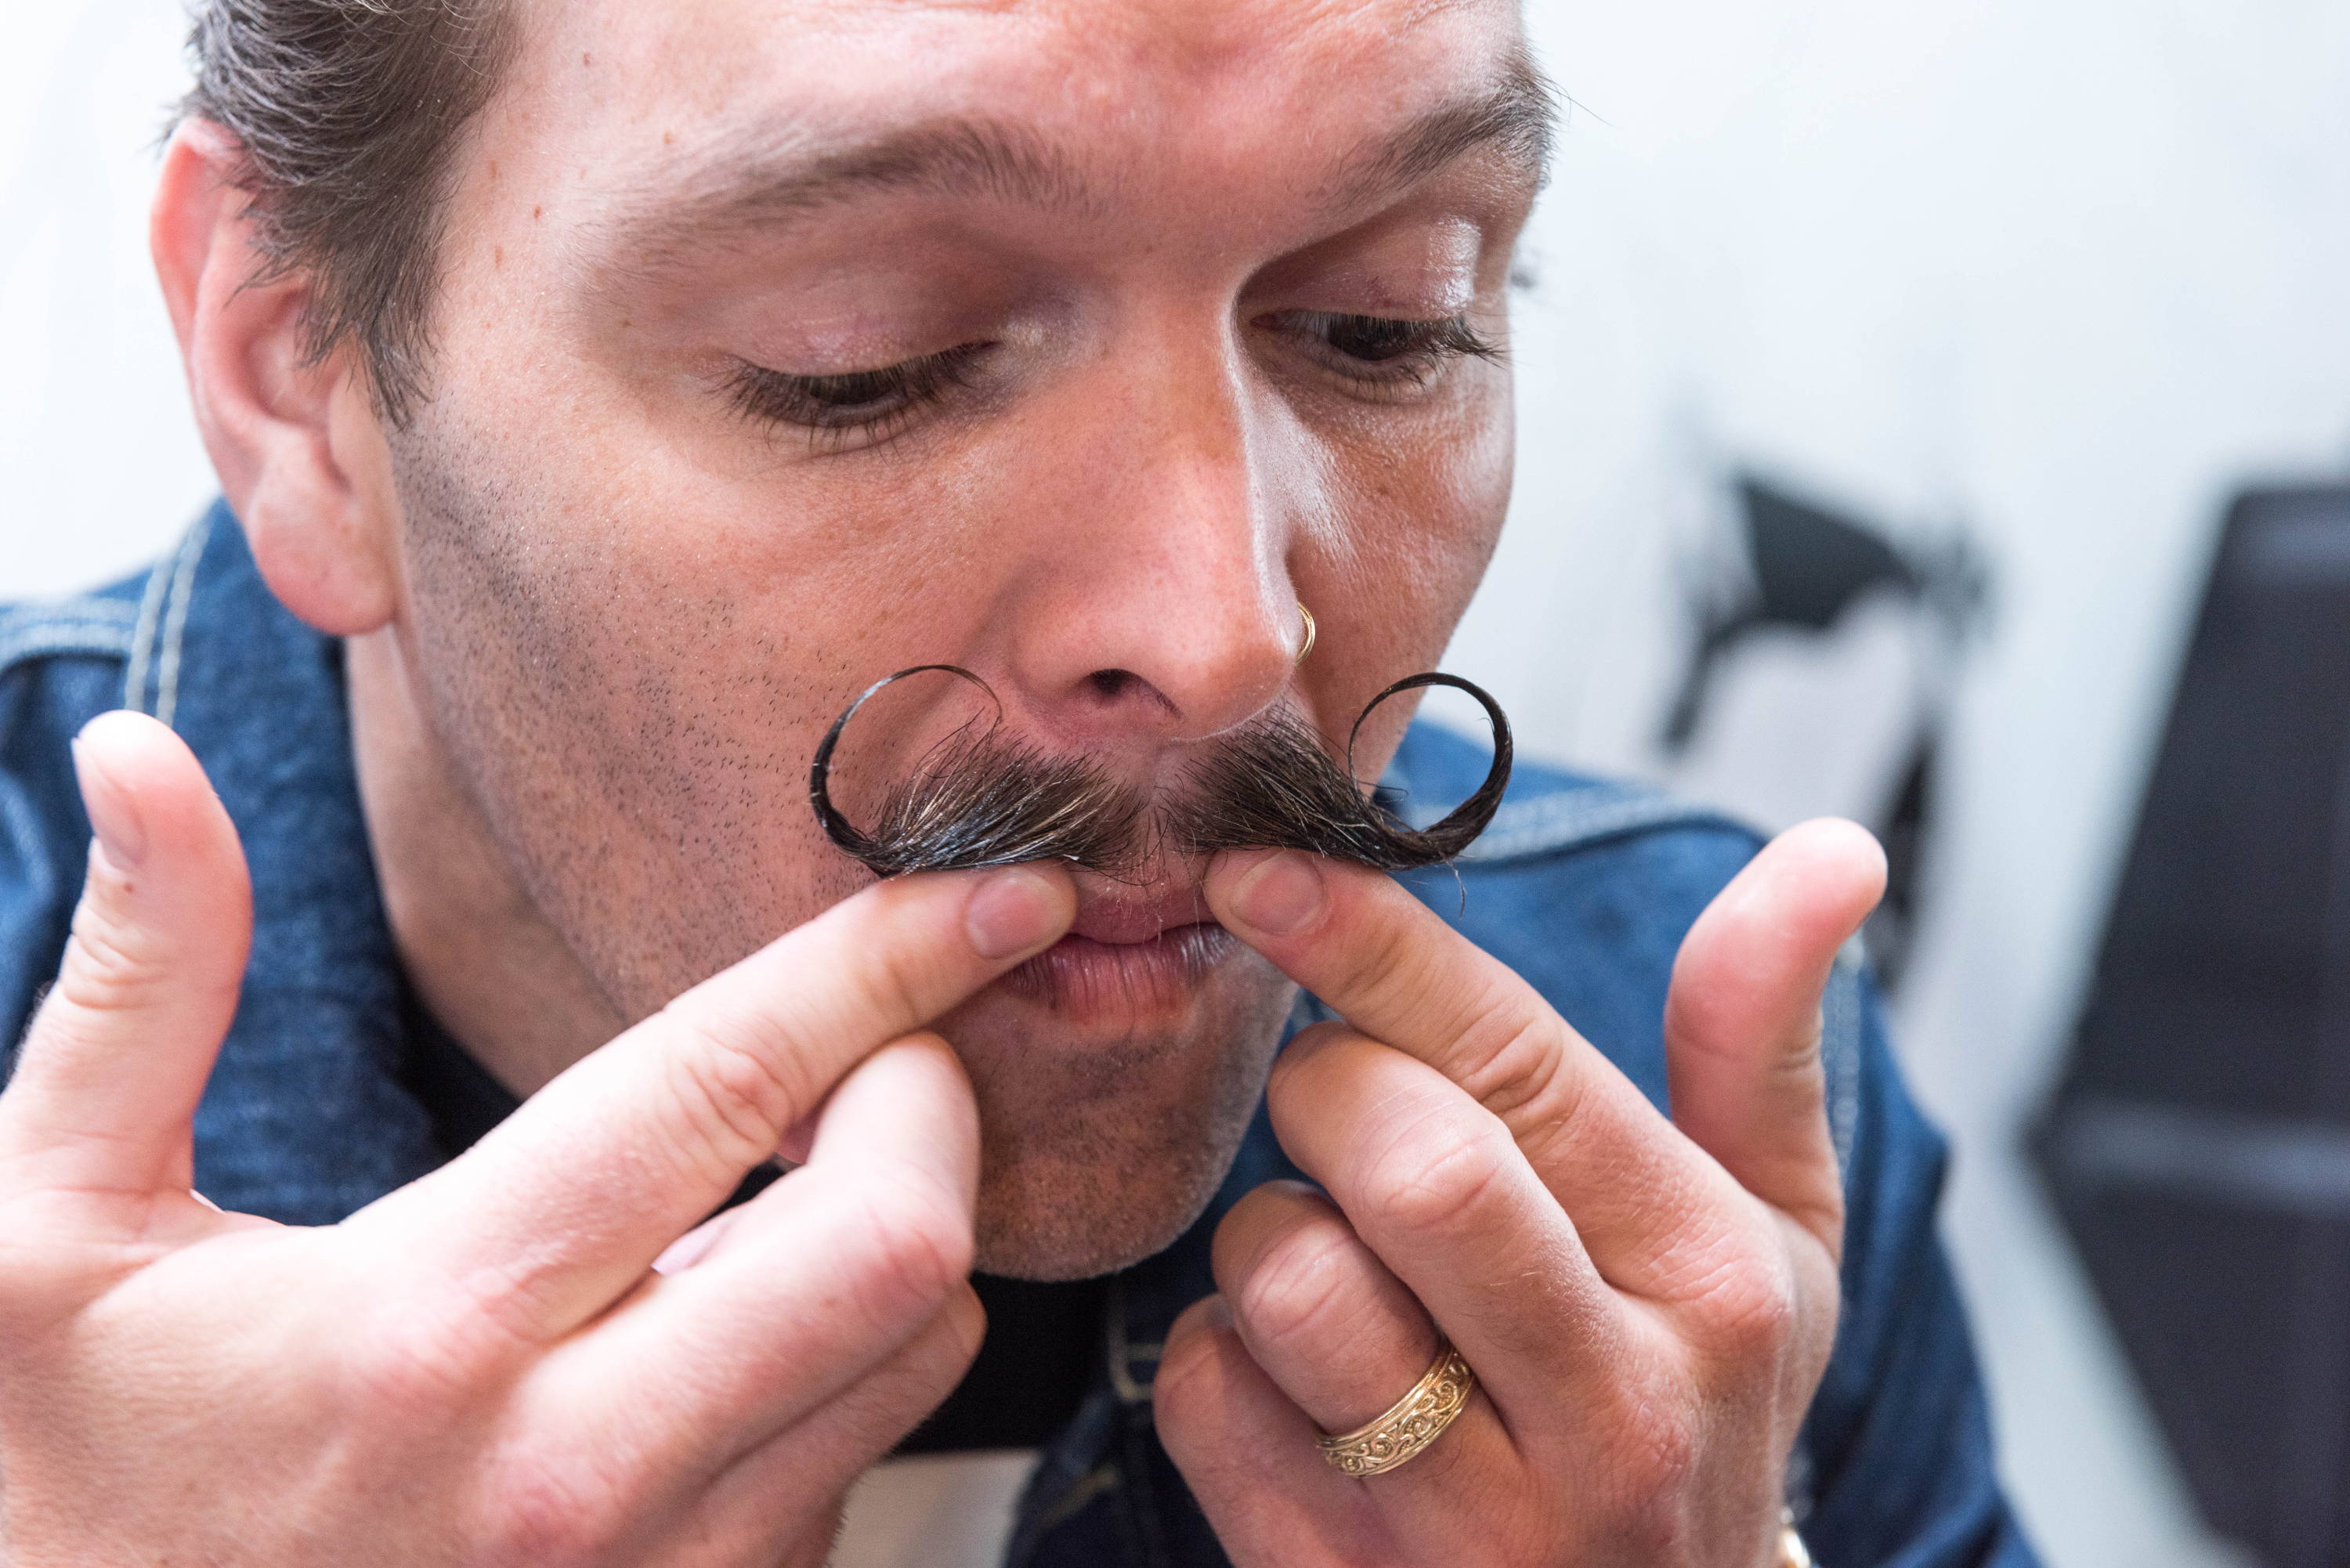 man styling his mustache